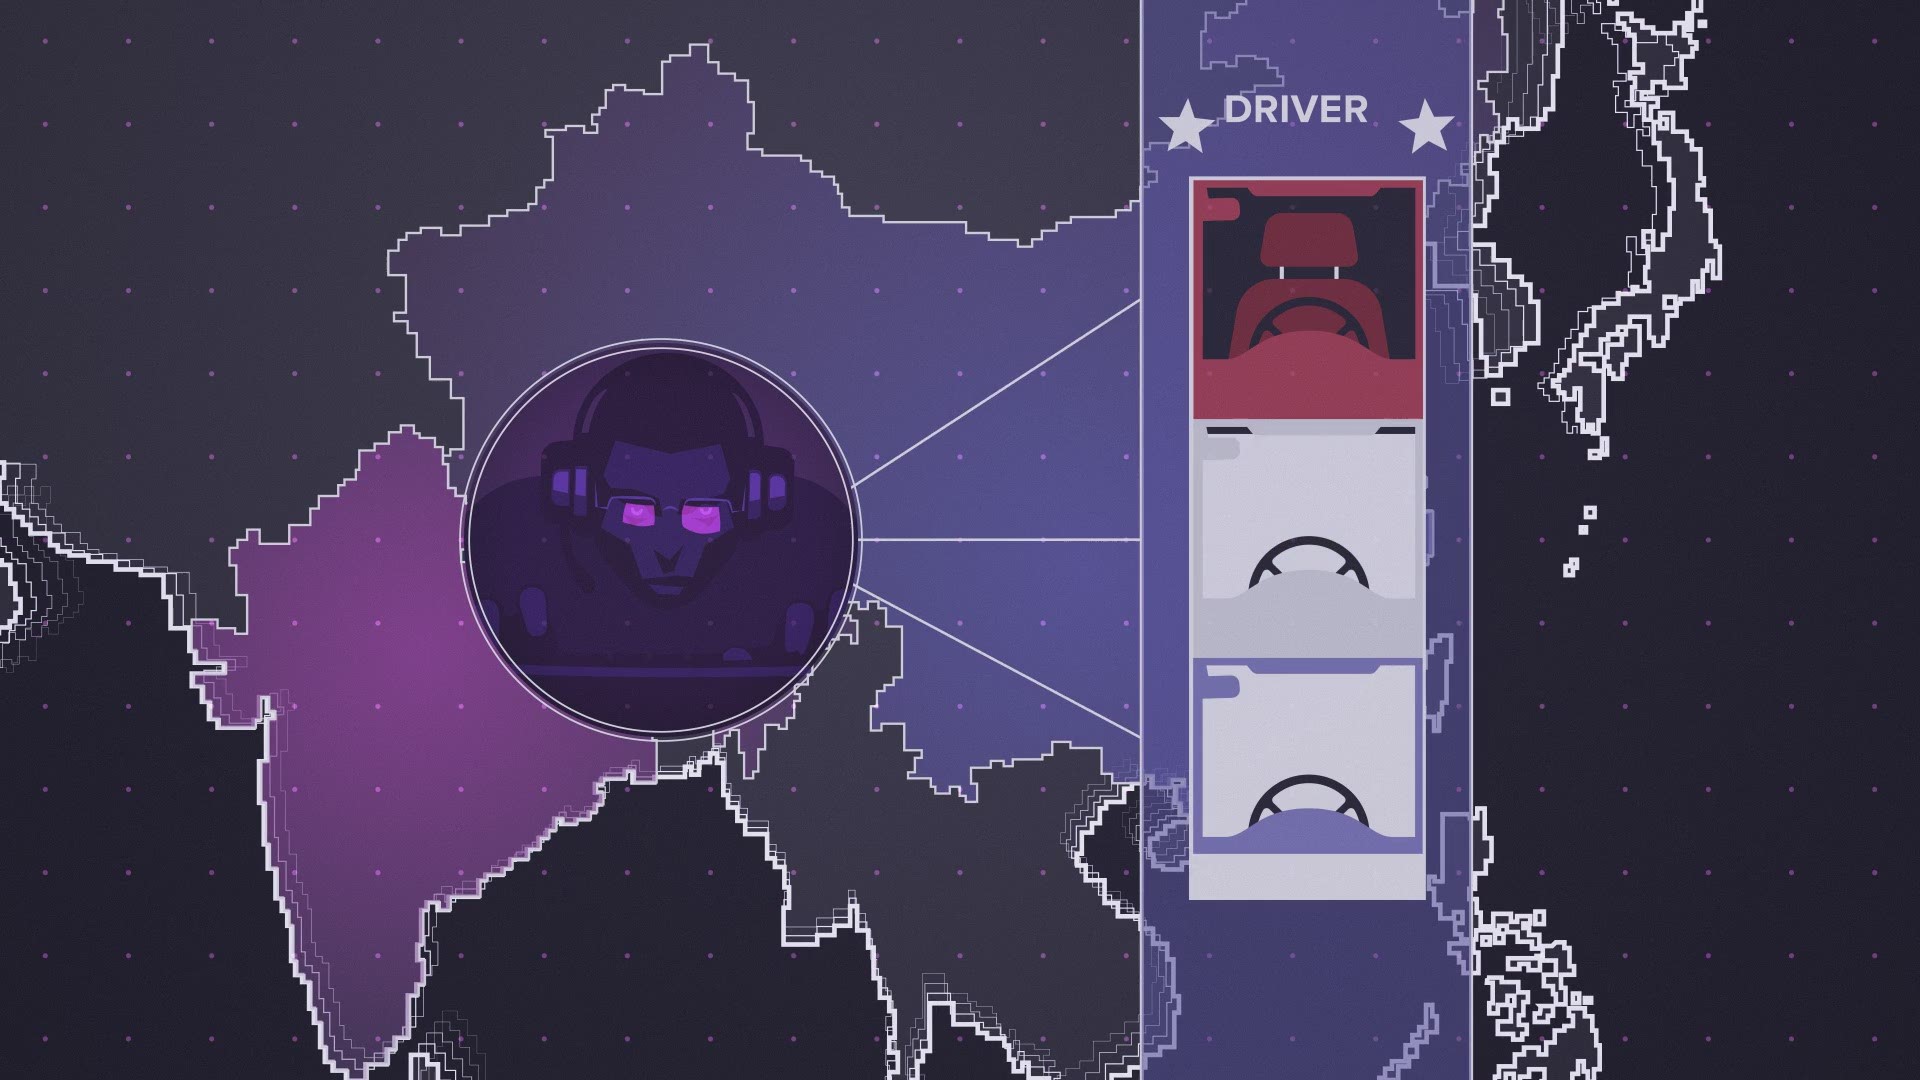 Could your Uber or Lyft account have been hacked to fuel a money laundering scheme overseas?